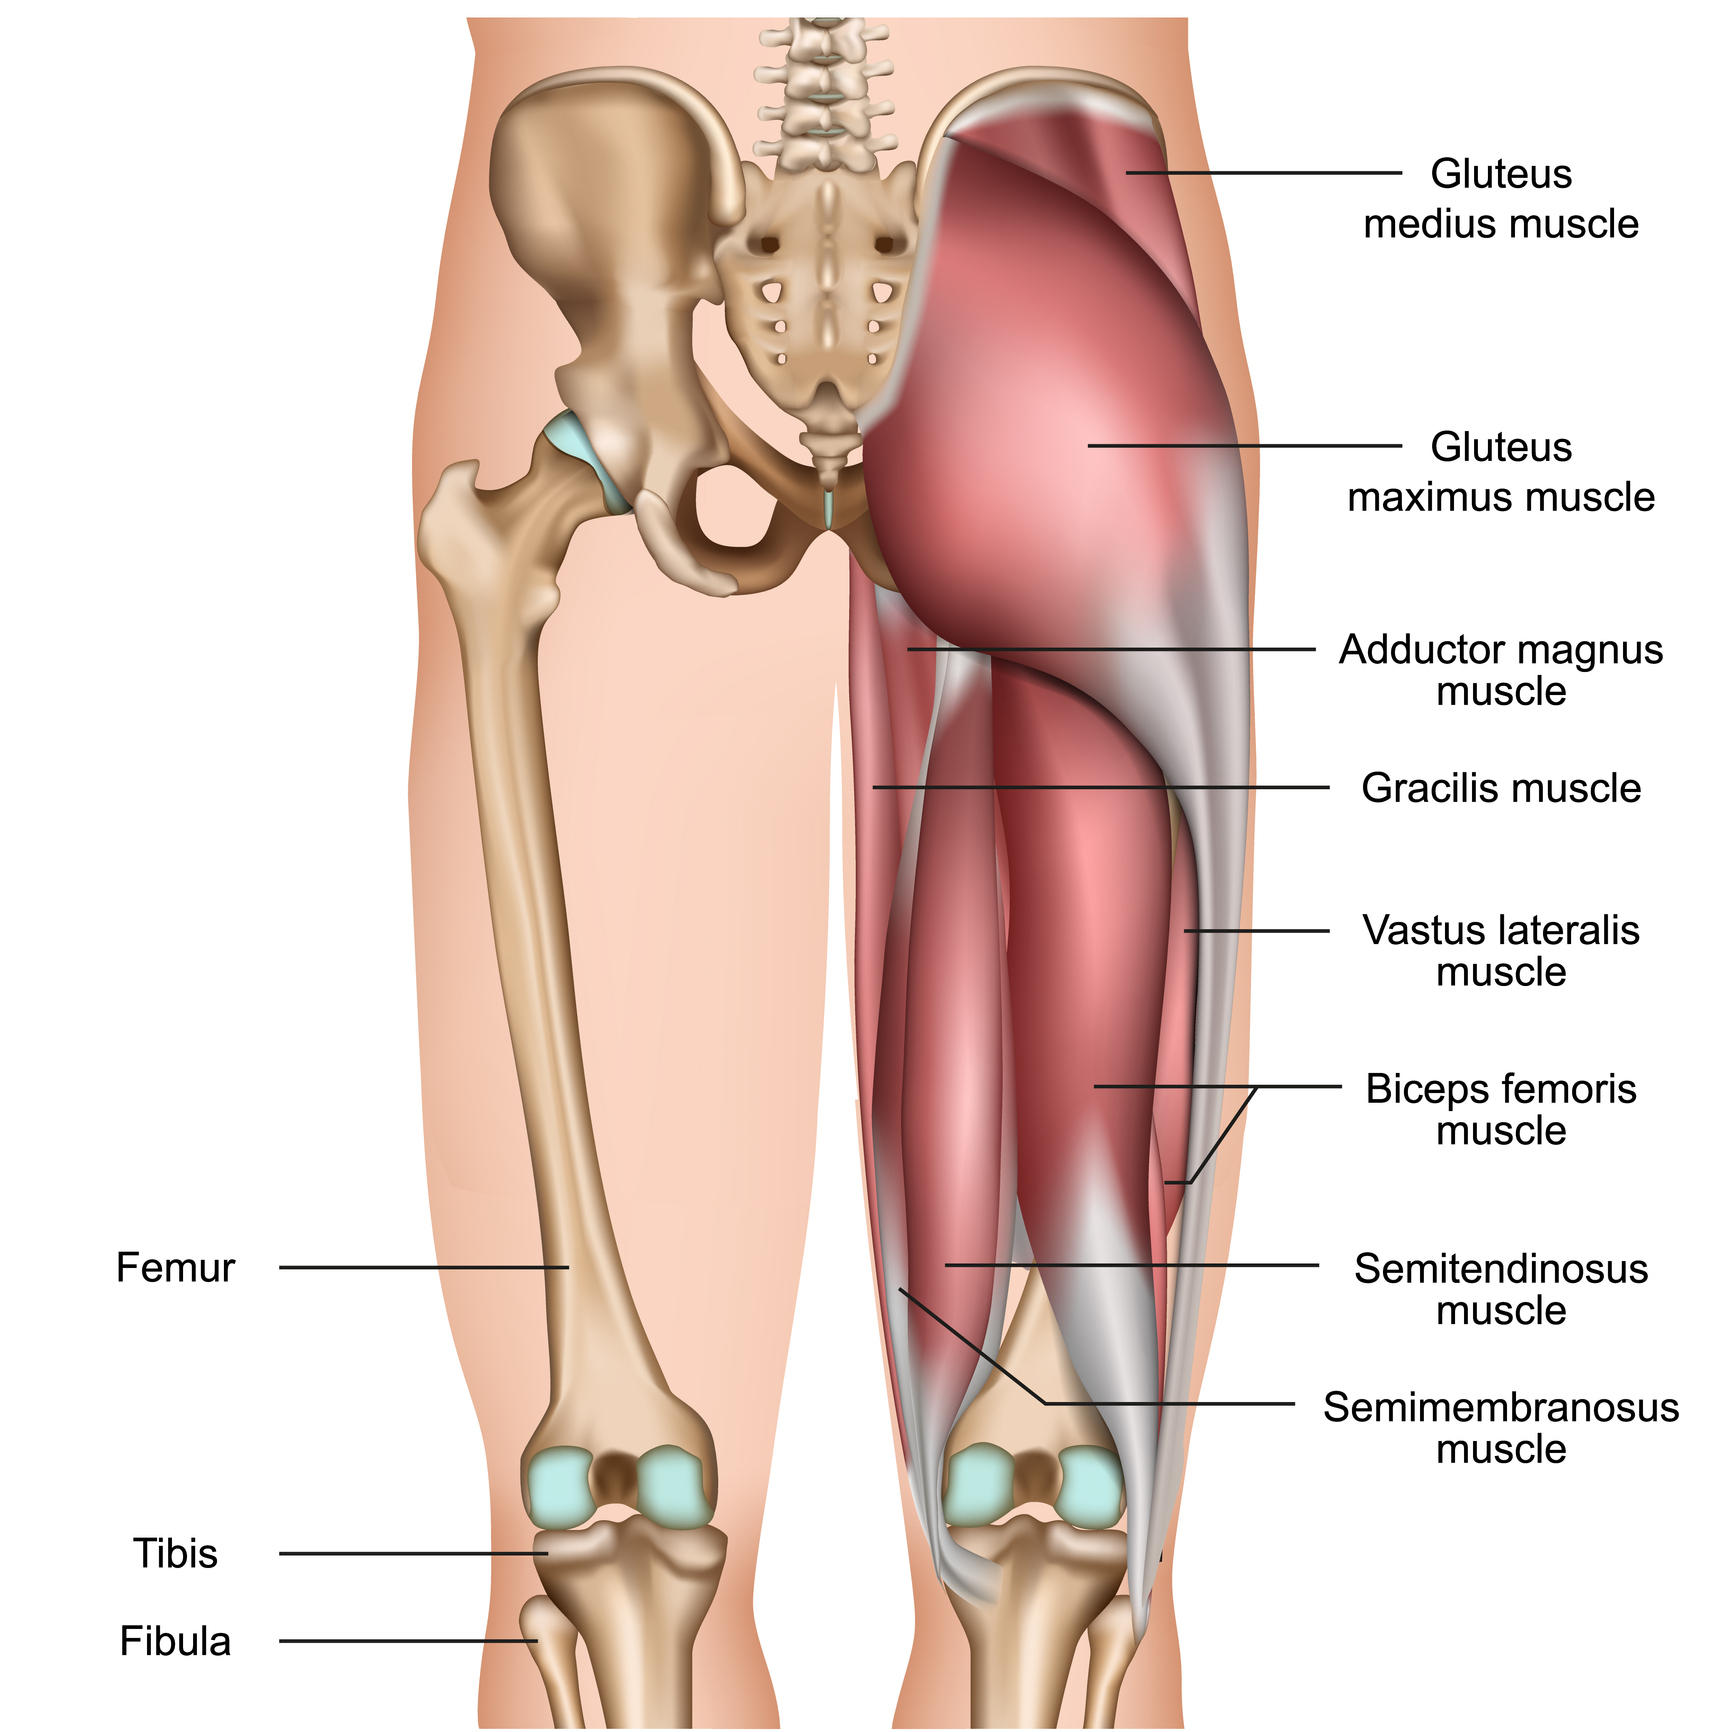 https://images.ctfassets.net/yixw23k2v6vo/spu_wysiwyg_fid42798_asset/bc91ee56132c25f1f3cf27fd656a10ba/hamstring_muscles_thigh_iStock-1143678513.jpg